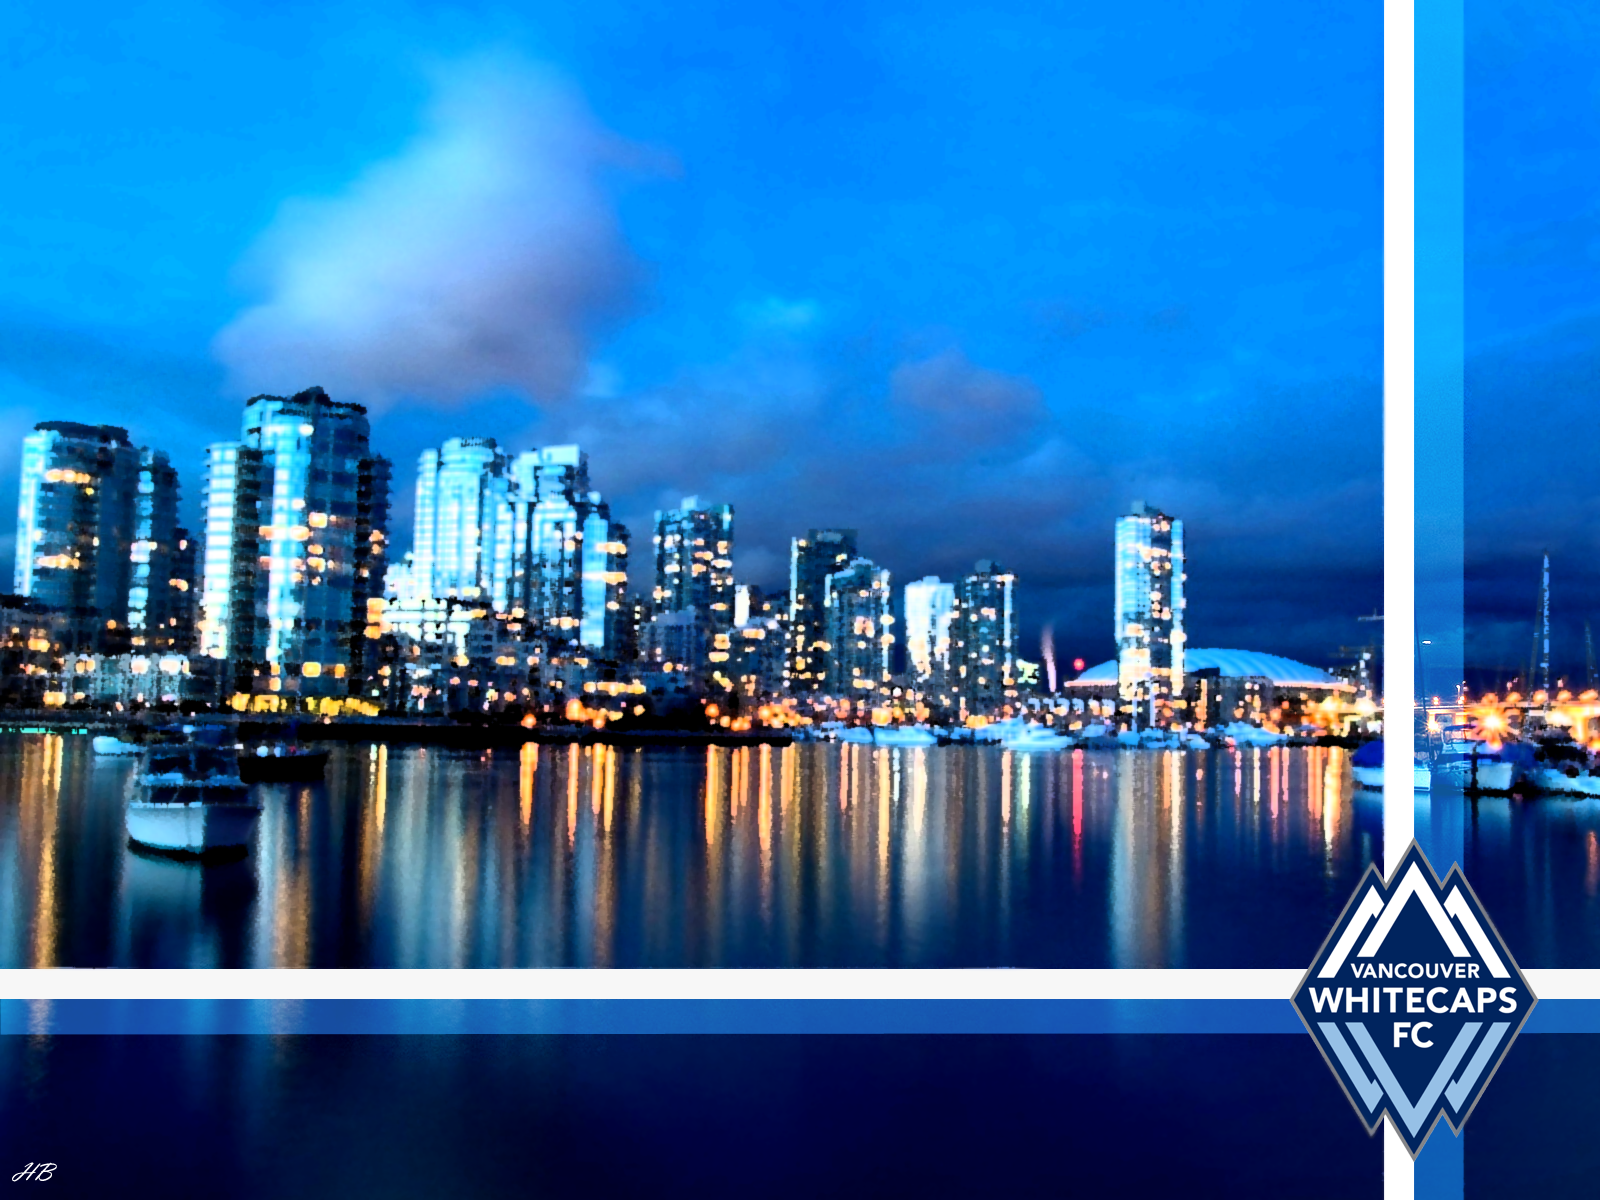 Vancouver Whitecaps Fc Wallpaper - Night City Wide , HD Wallpaper & Backgrounds